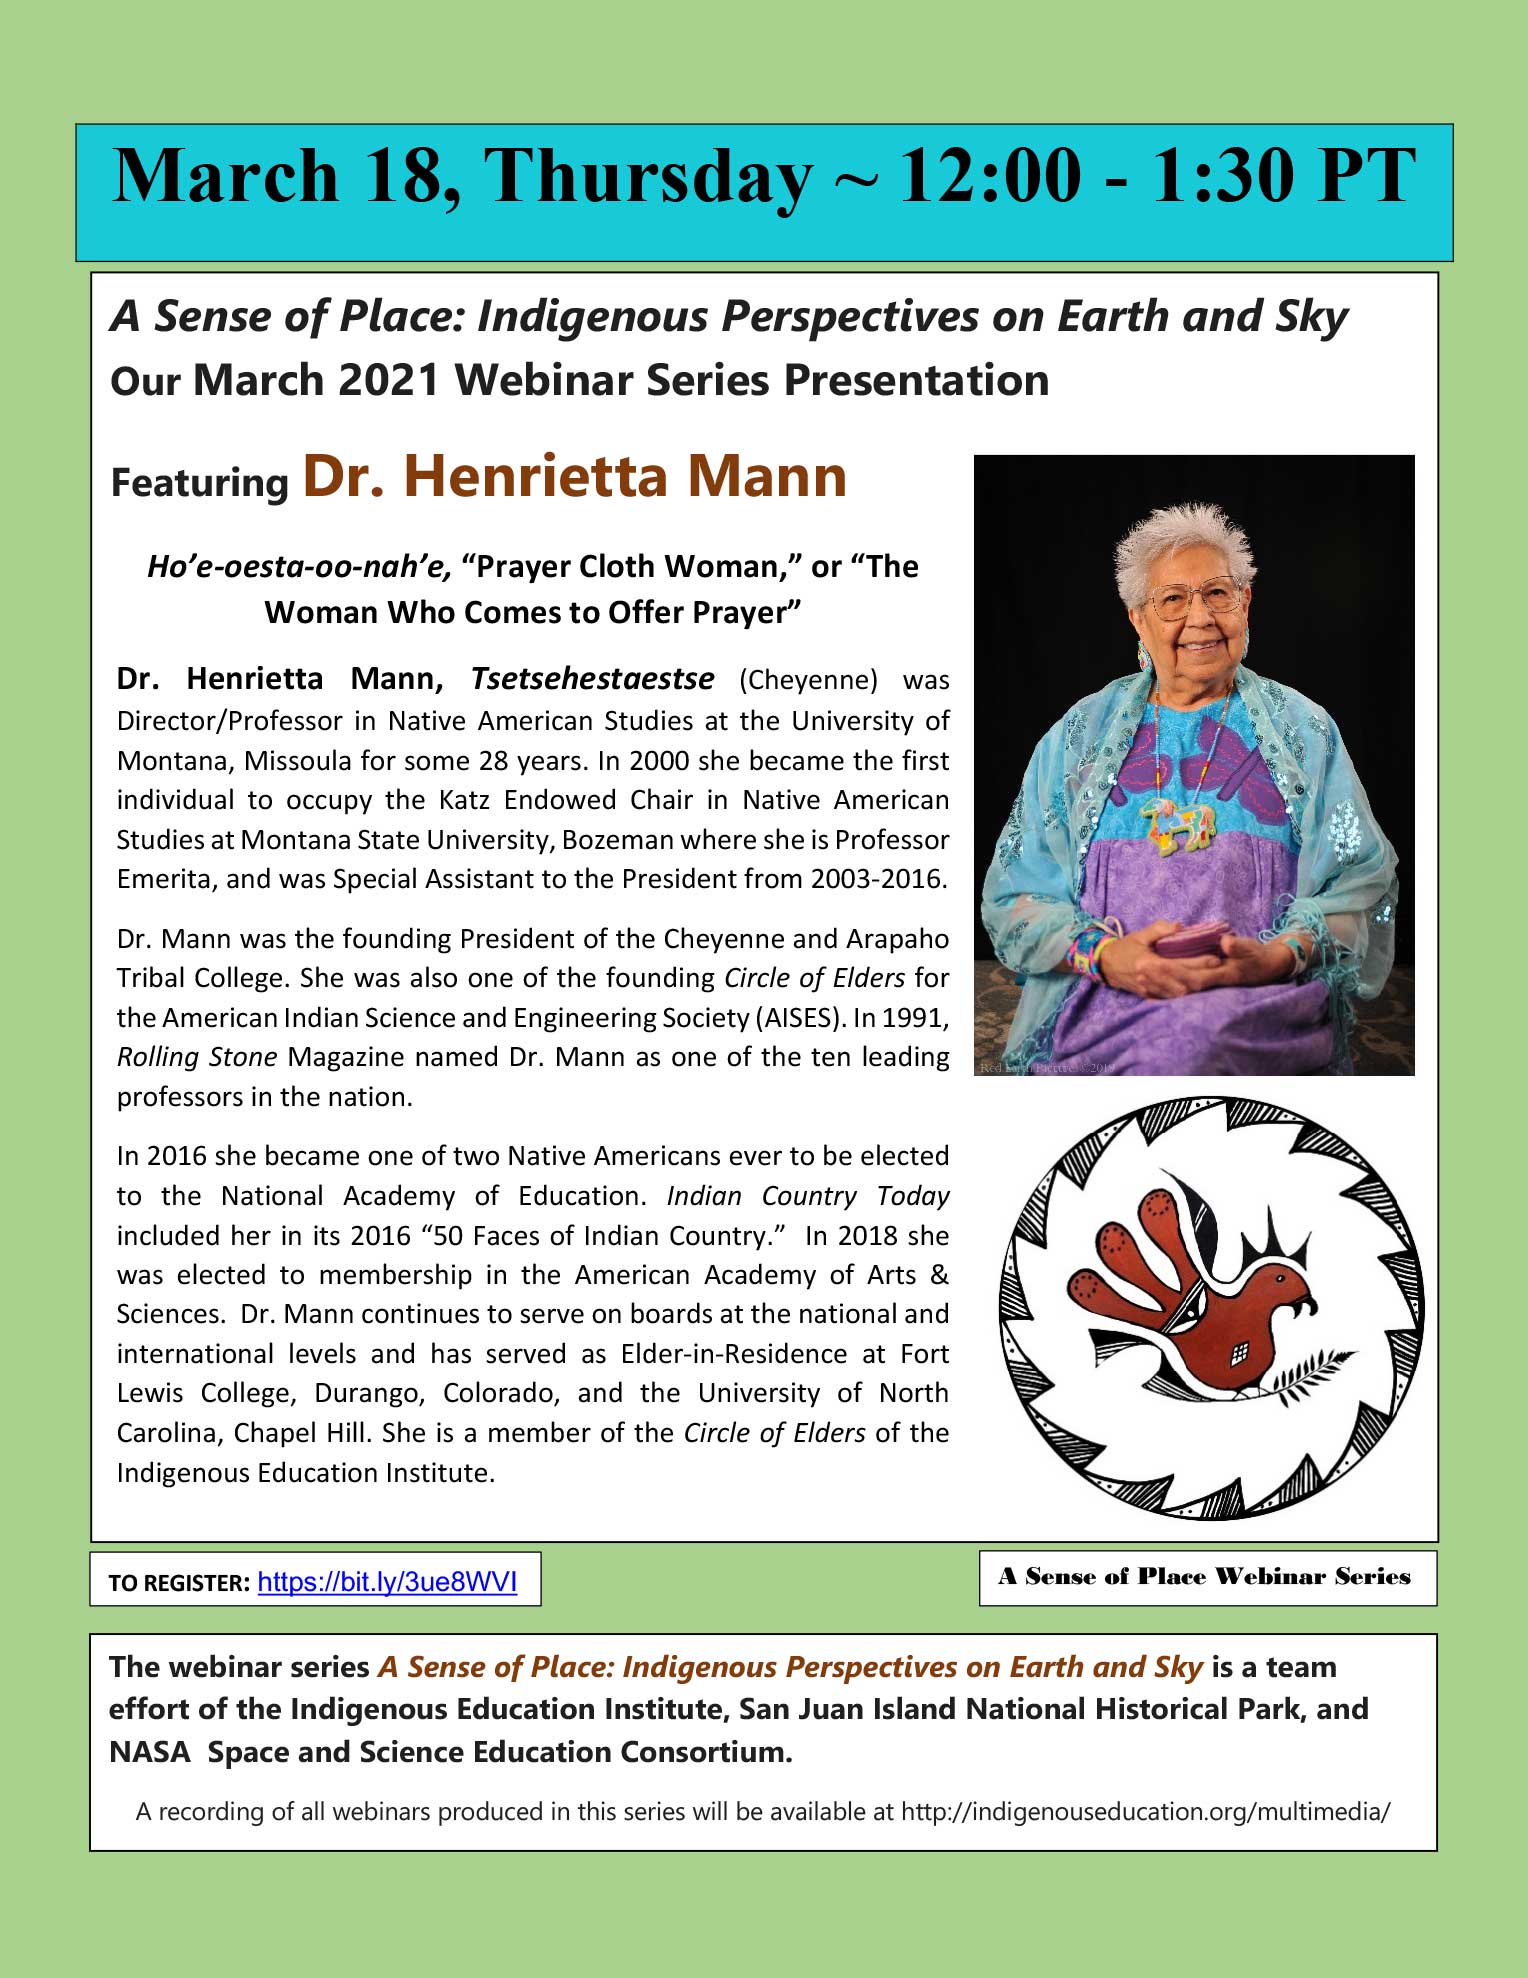 A Sense of Place: Indigenous Perspectives on Earth and Sky Webinar Series Presentation